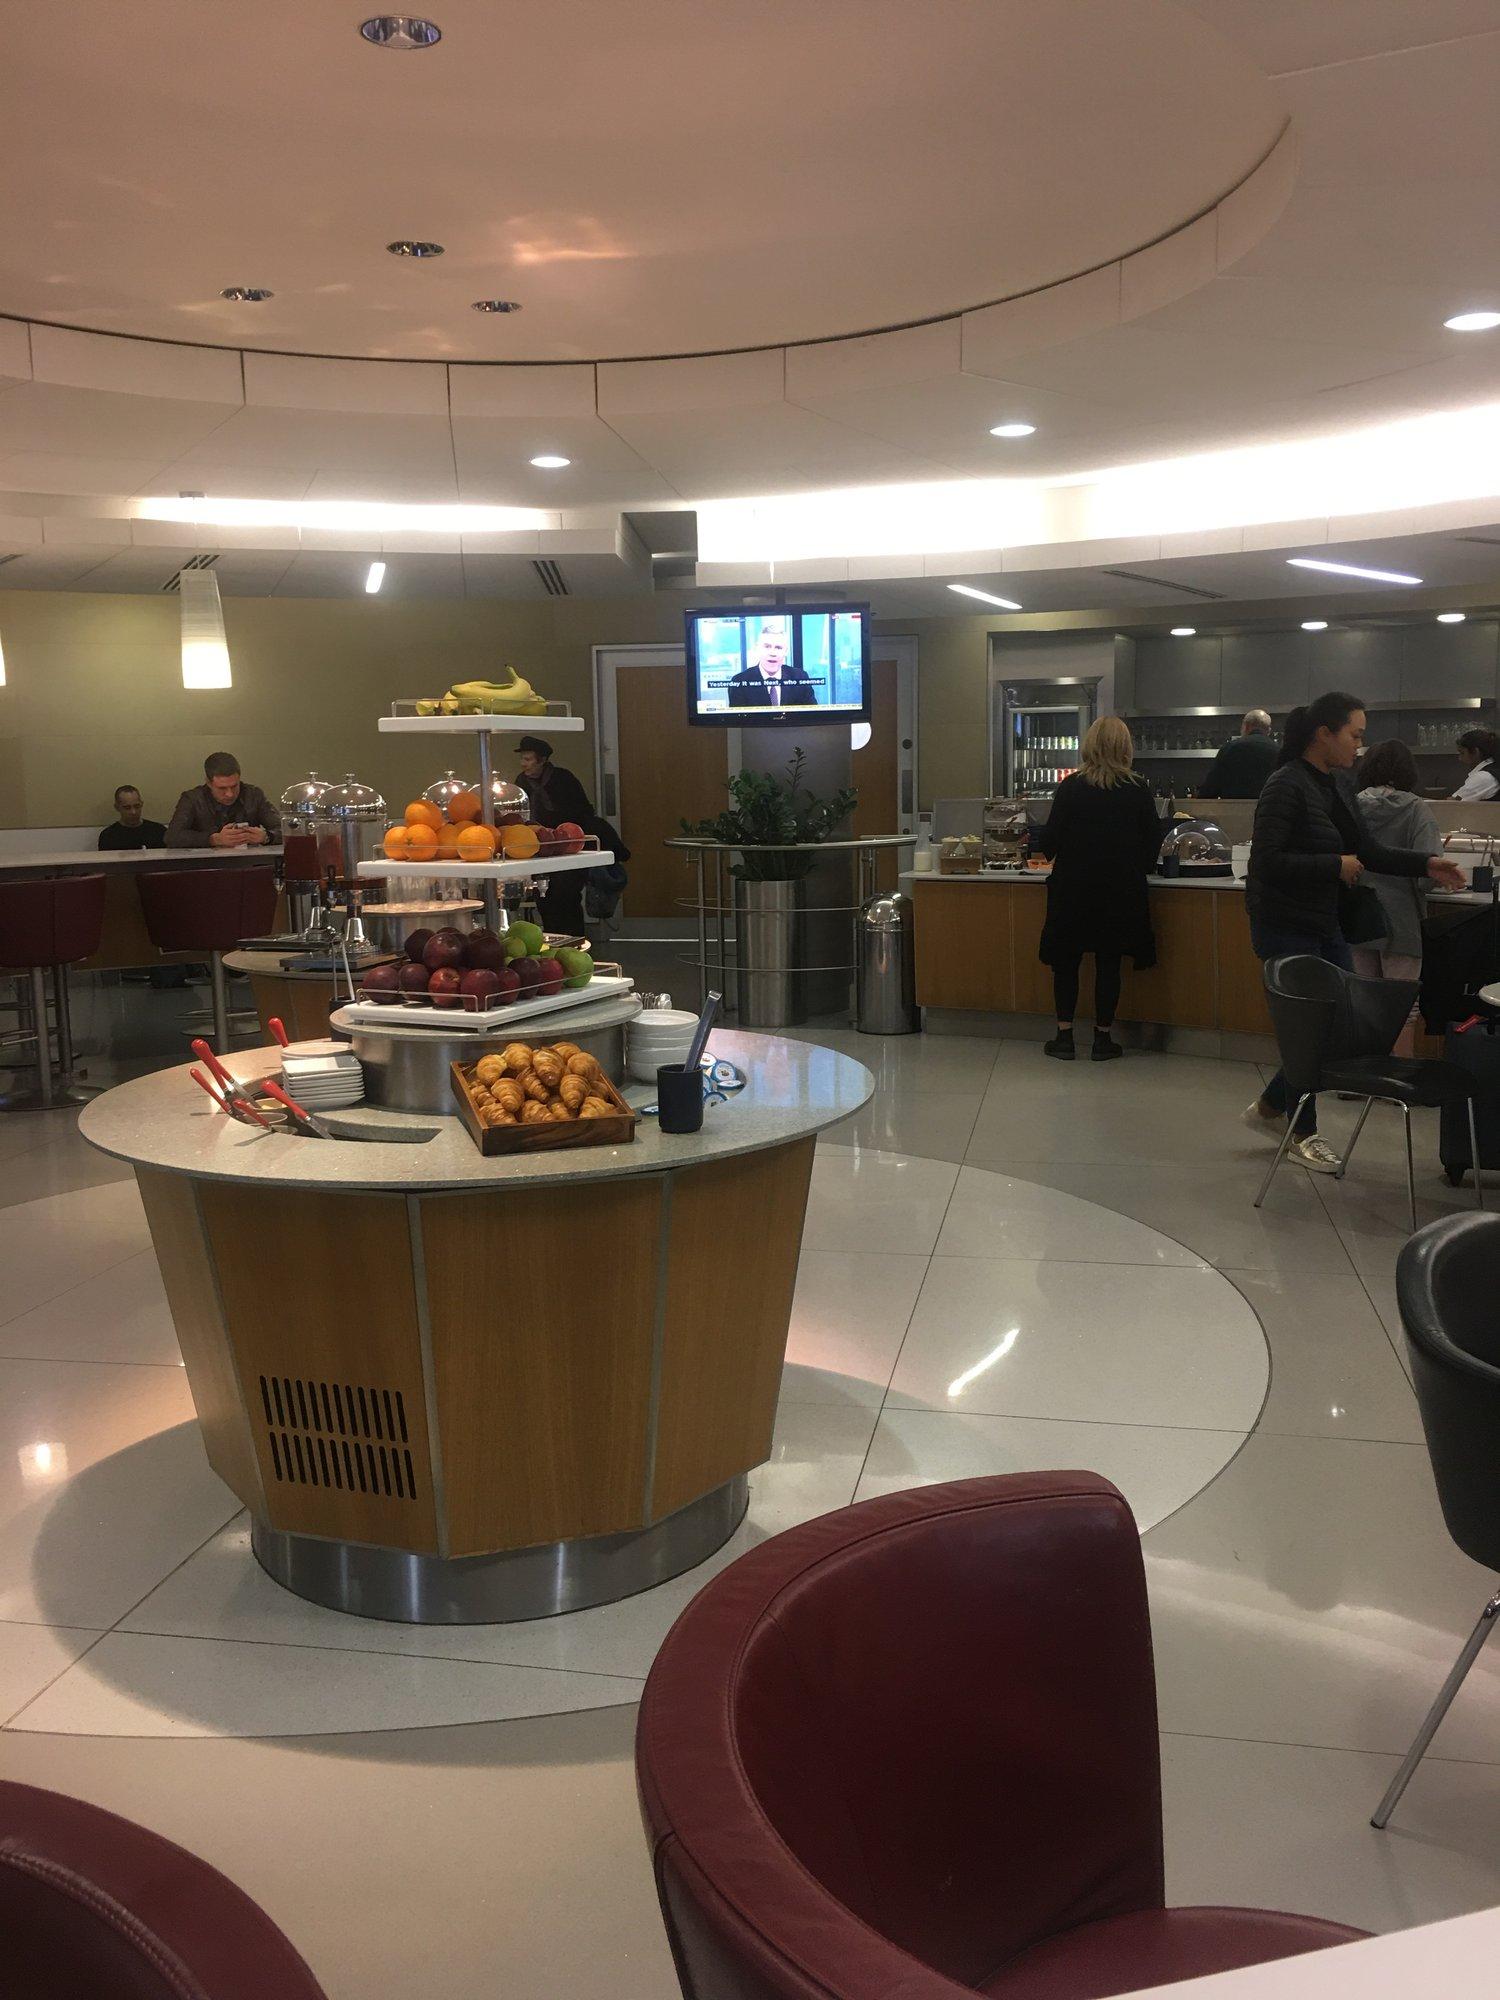 American Airlines Admirals Club image 36 of 38